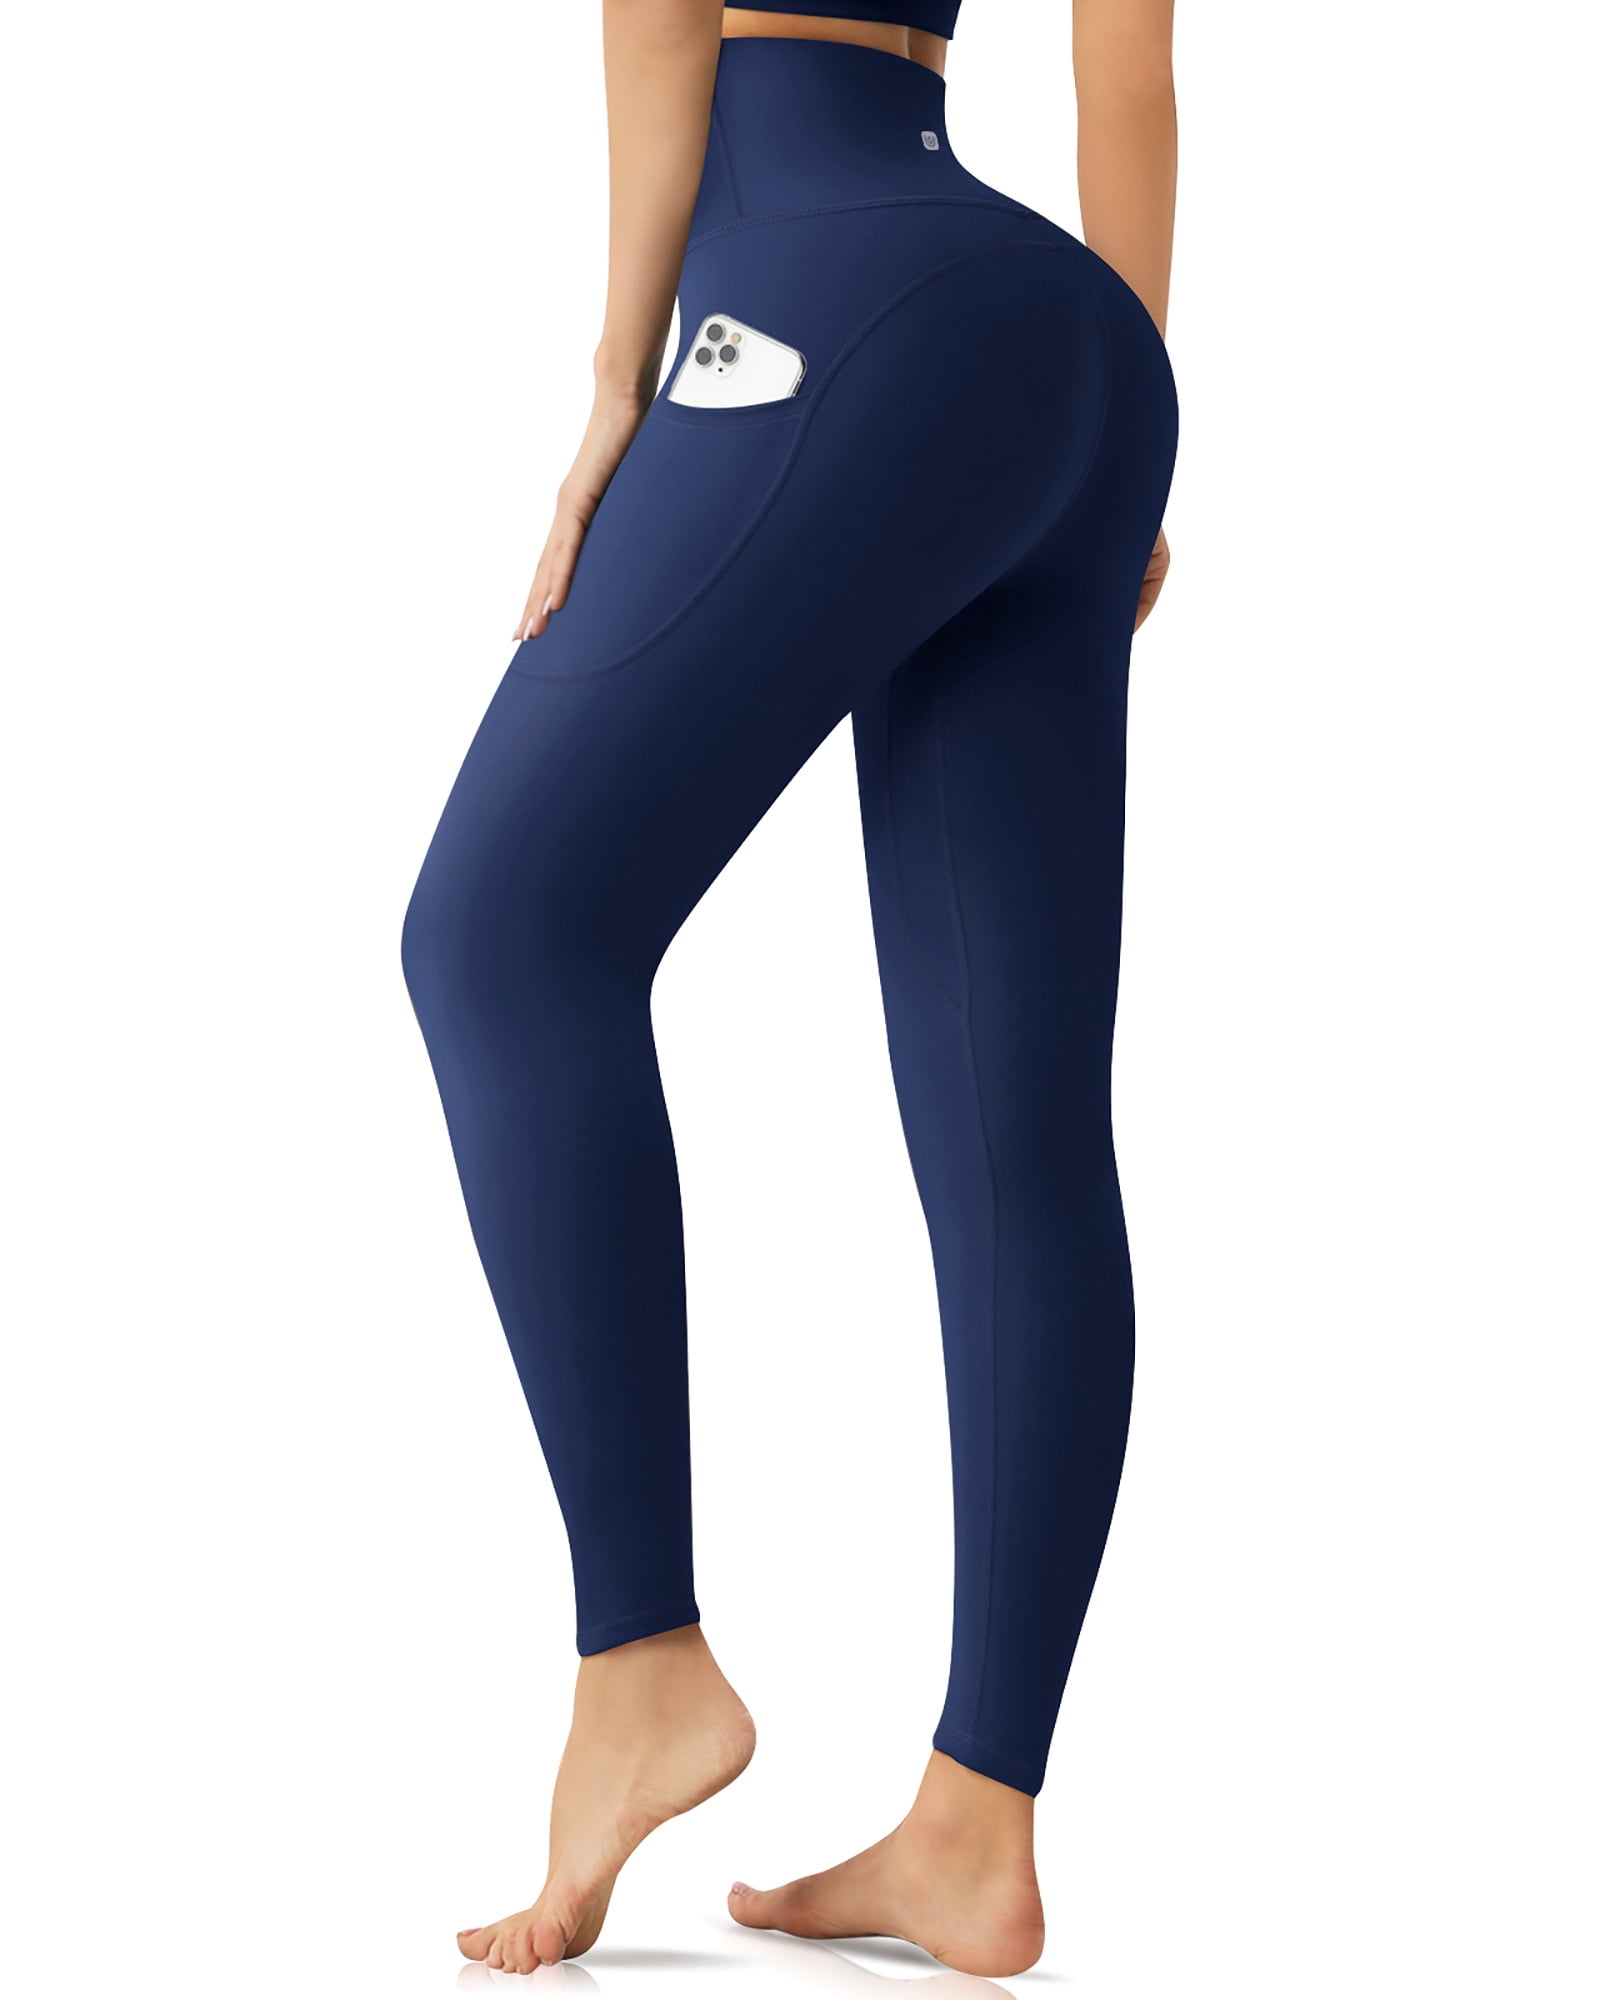 UUE 28Inseam Navy Blue Leggings with Pockets for Women, High